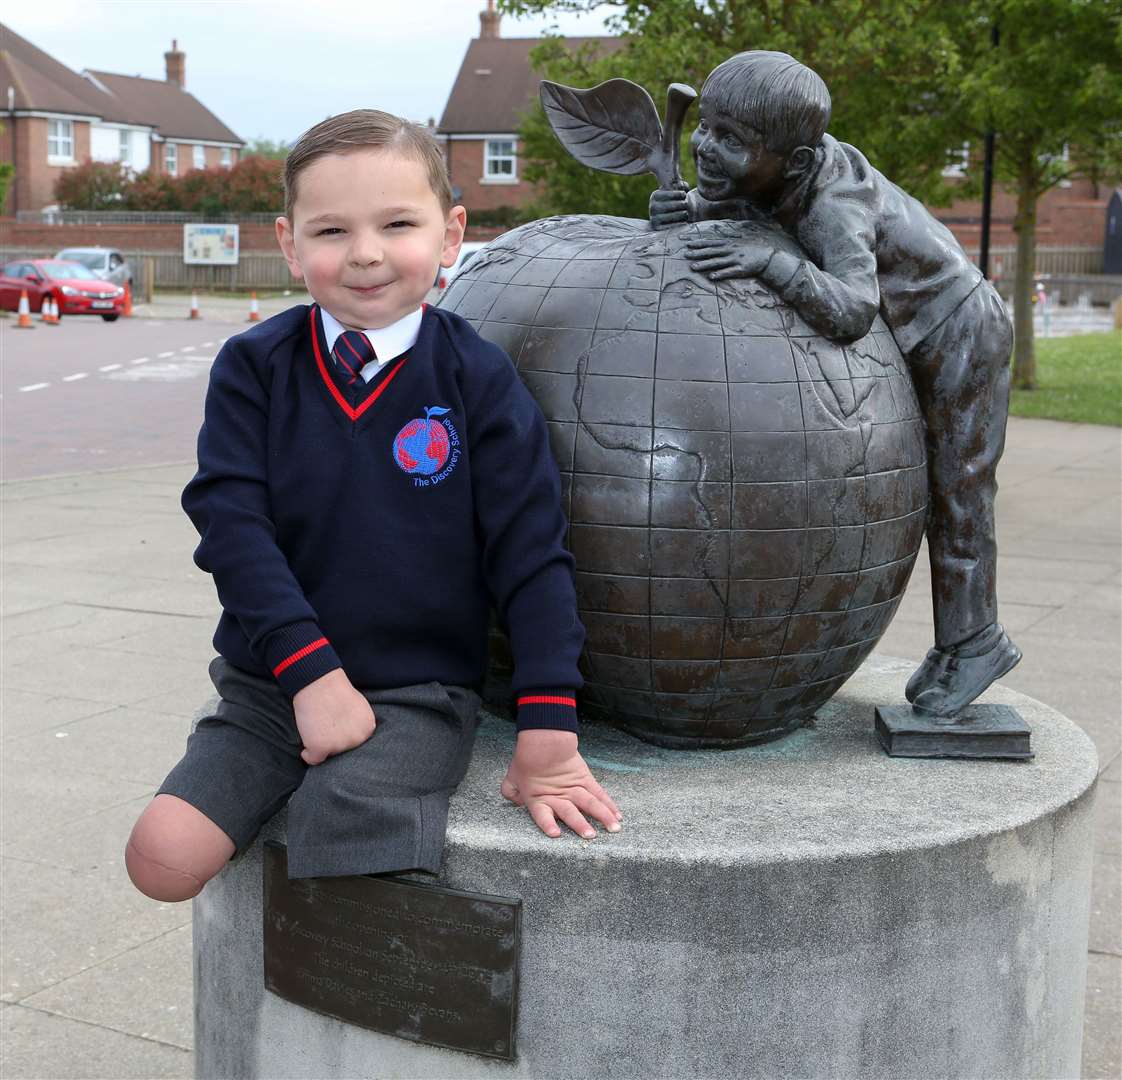 Tony Hudgell started at The Discovery School in Kings Hill earlier this month. Picture: Jim Bennett